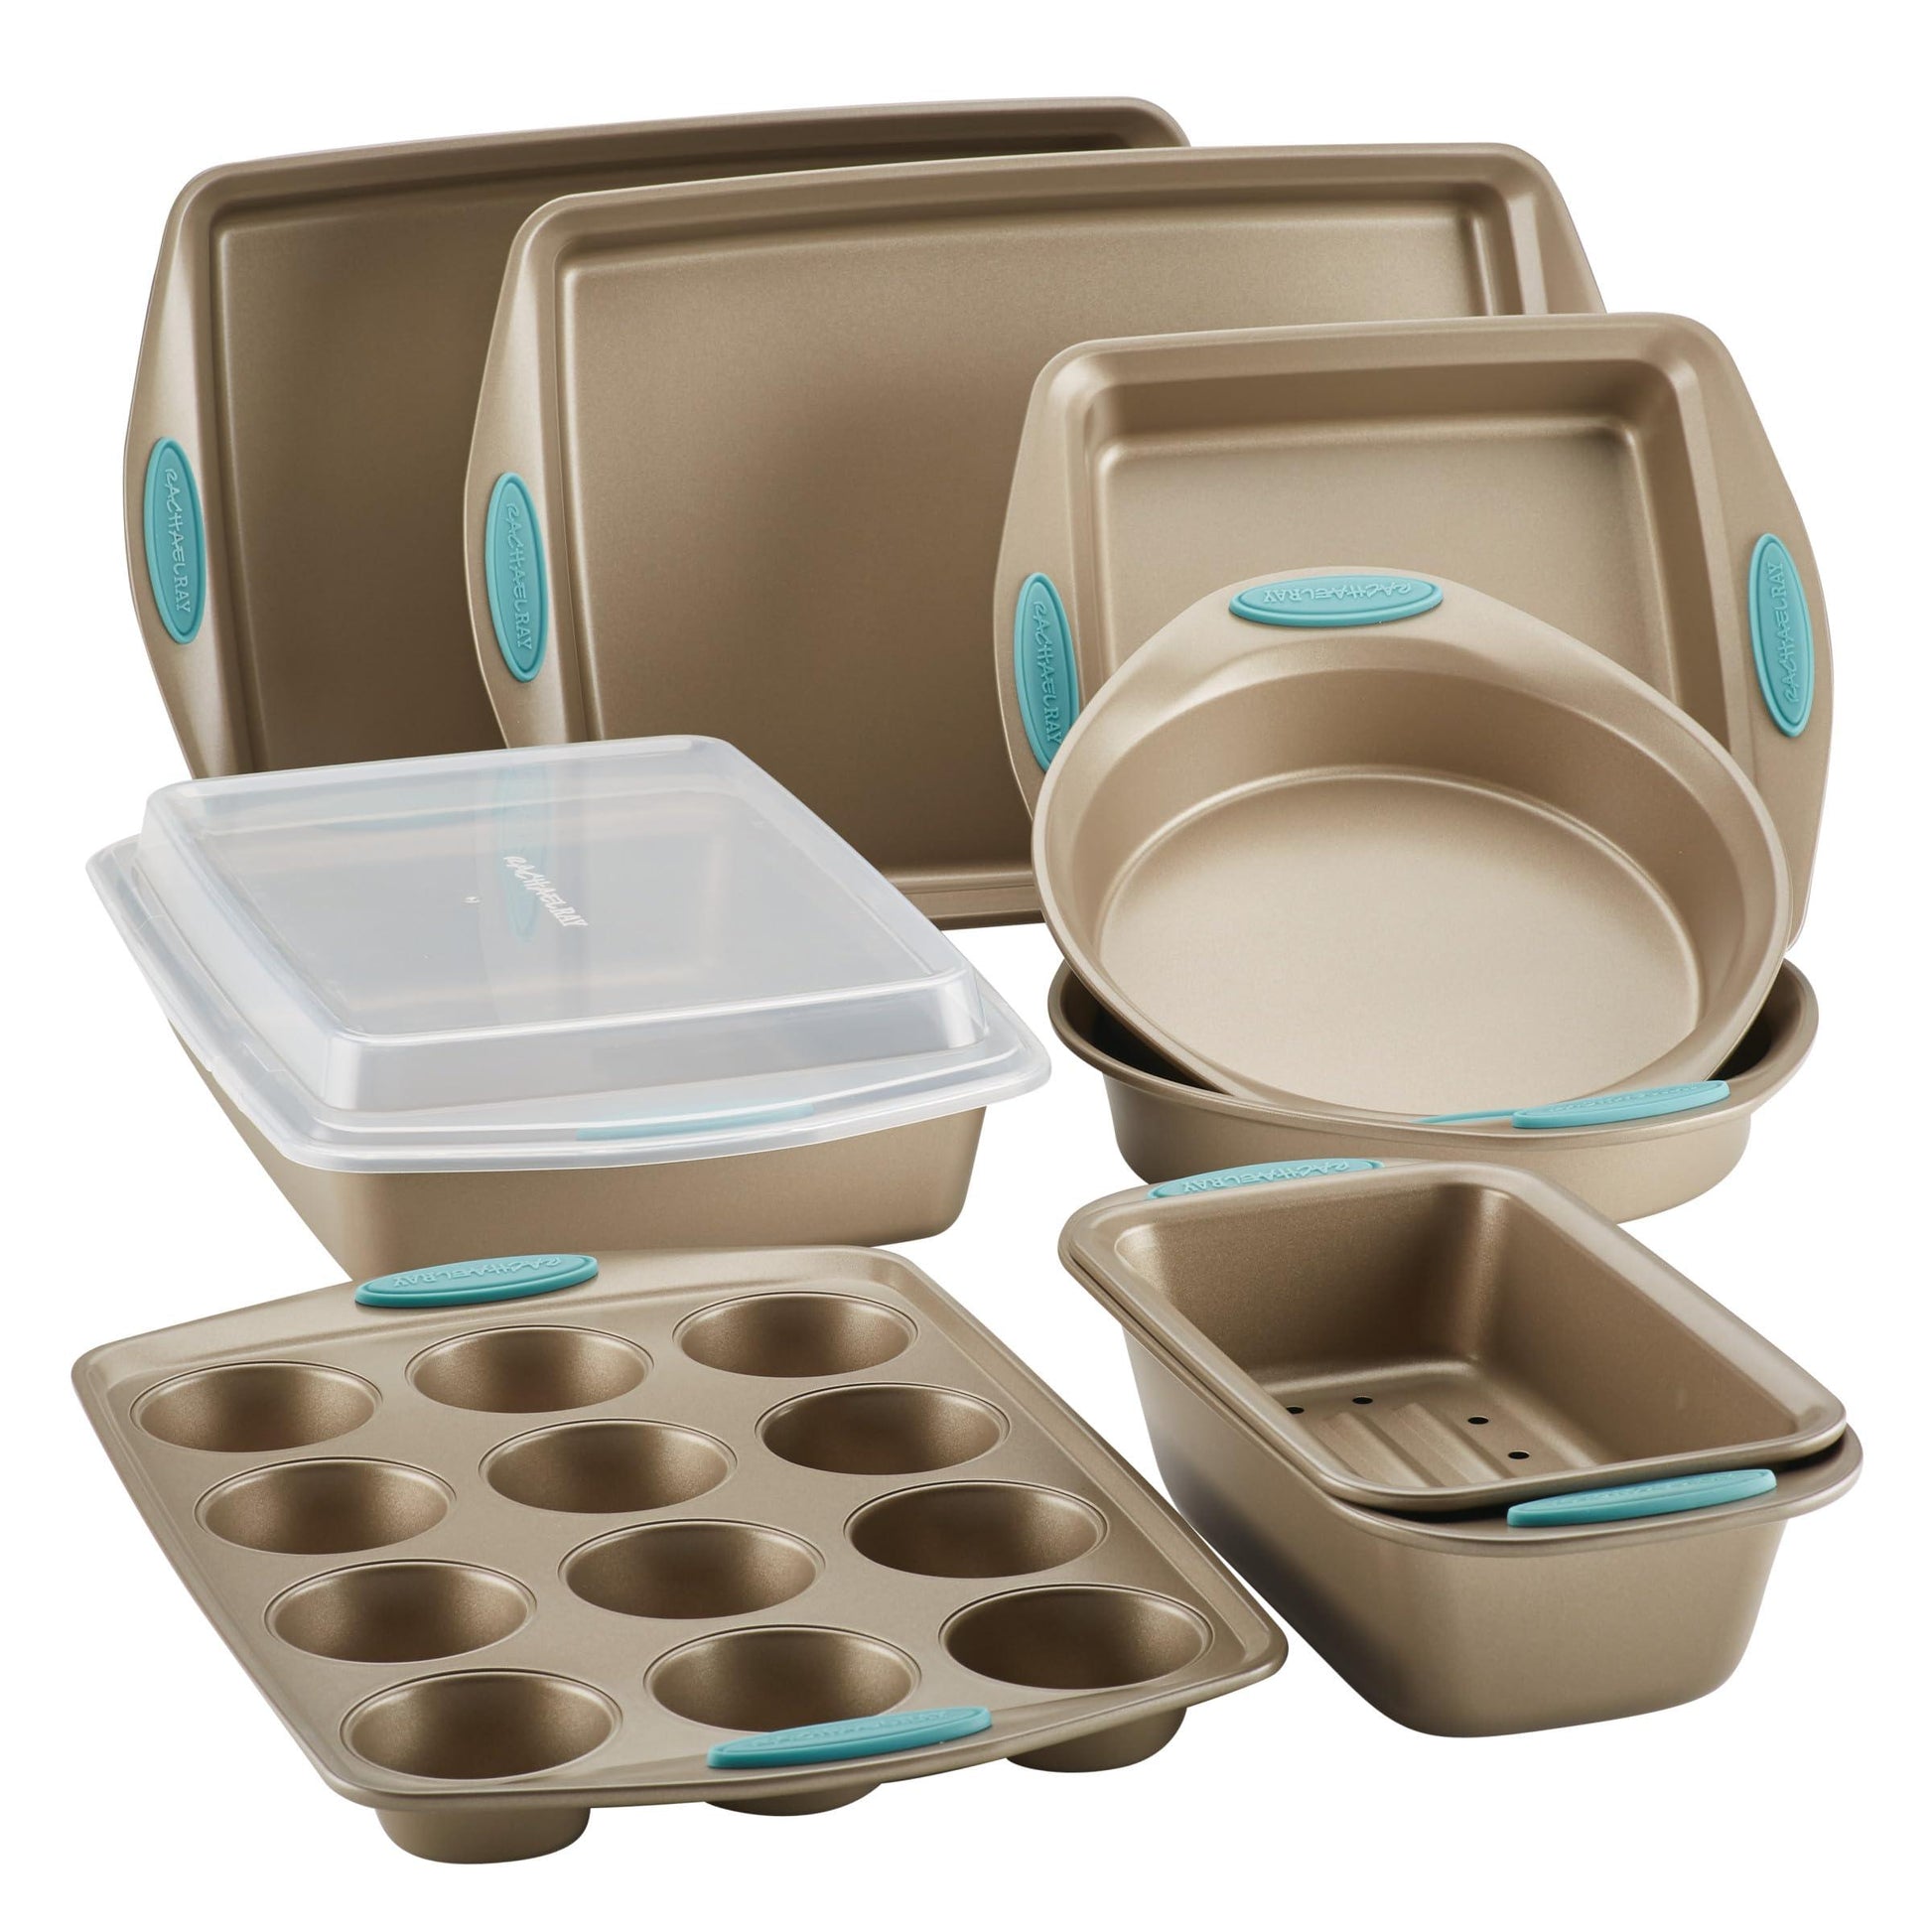 Rachael Ray 47578 Cucina Nonstick Bakeware Set with Grips Includes Nonstick Bread Pan, Baking Sheet, Cookie Sheet, Baking Pans, Cake Pan and Muffin Pan - 10 Piece, Latte Brown with Agave Blue Grips - CookCave